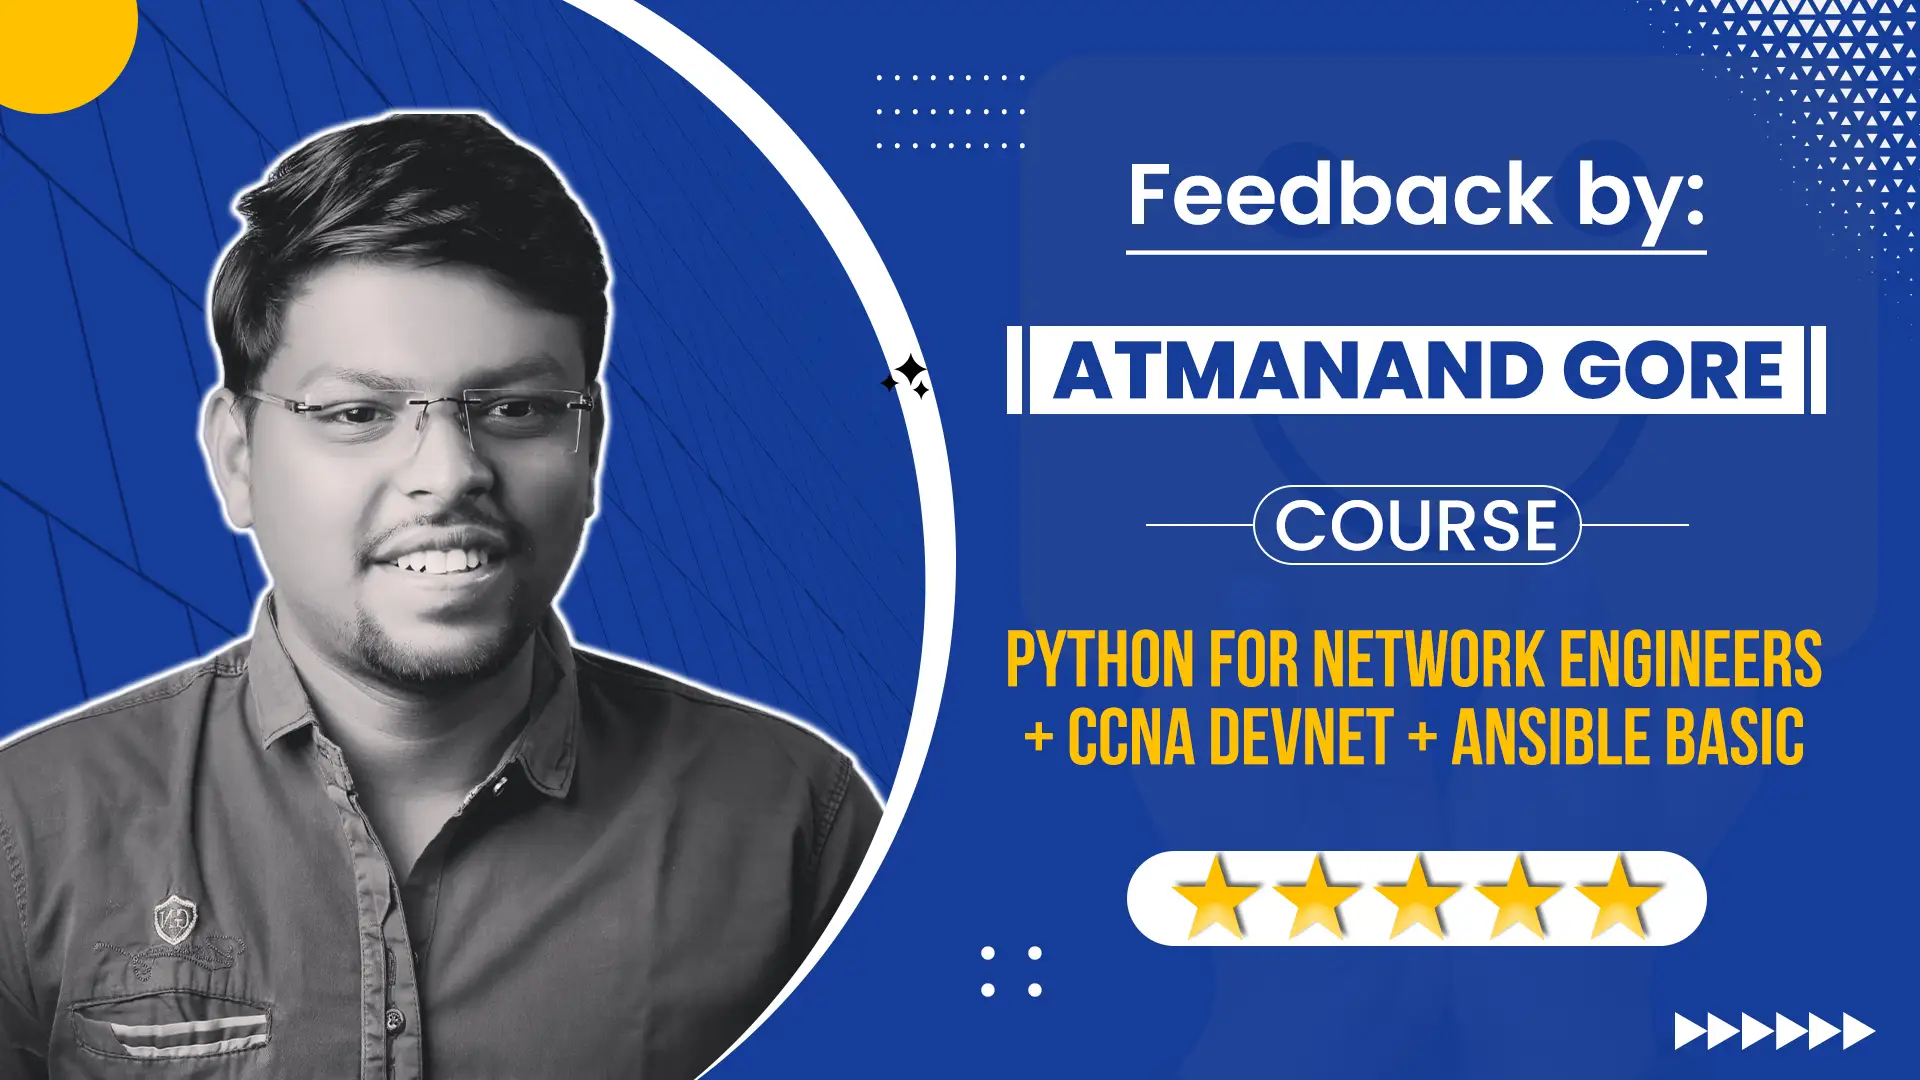 Feedback by Atmanand Gore for Course Python for Network Engineers + CCNA DevNet + Ansible Basics